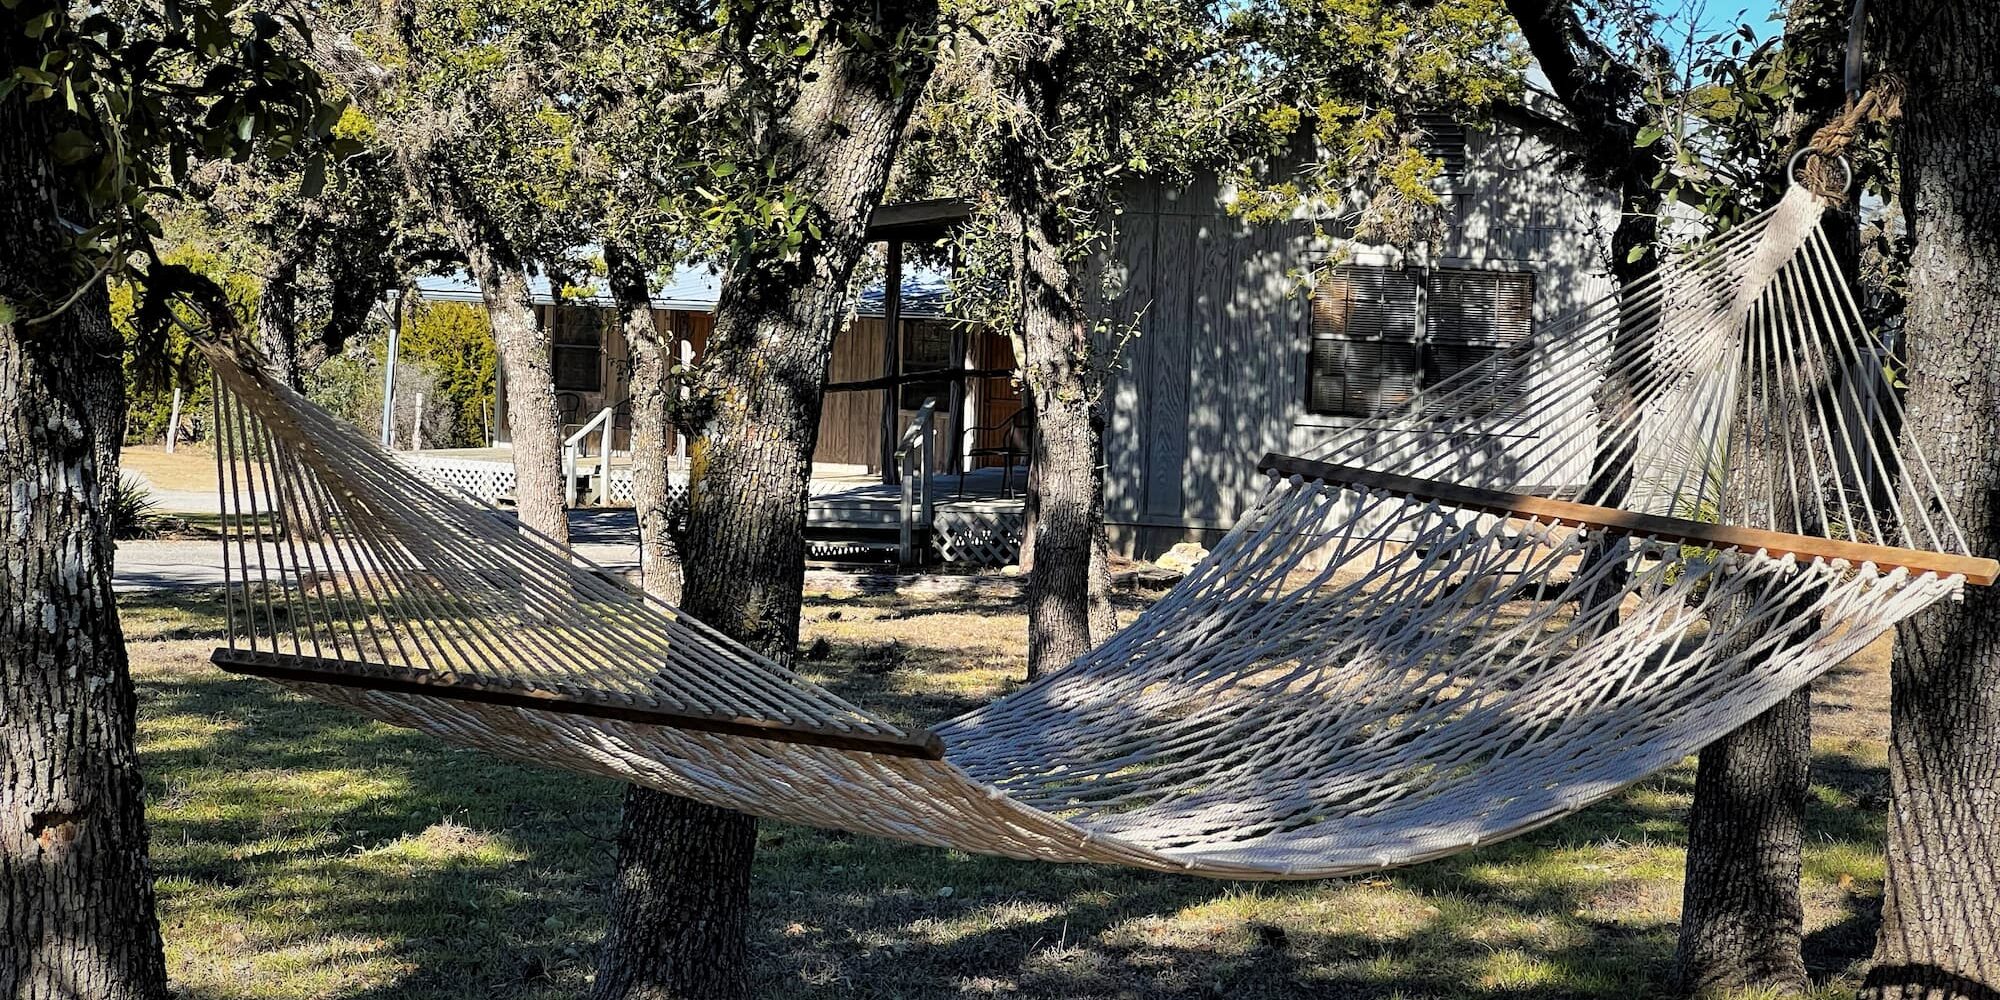 The secluded environment of the outdoor hammock near the guest ranch cabins